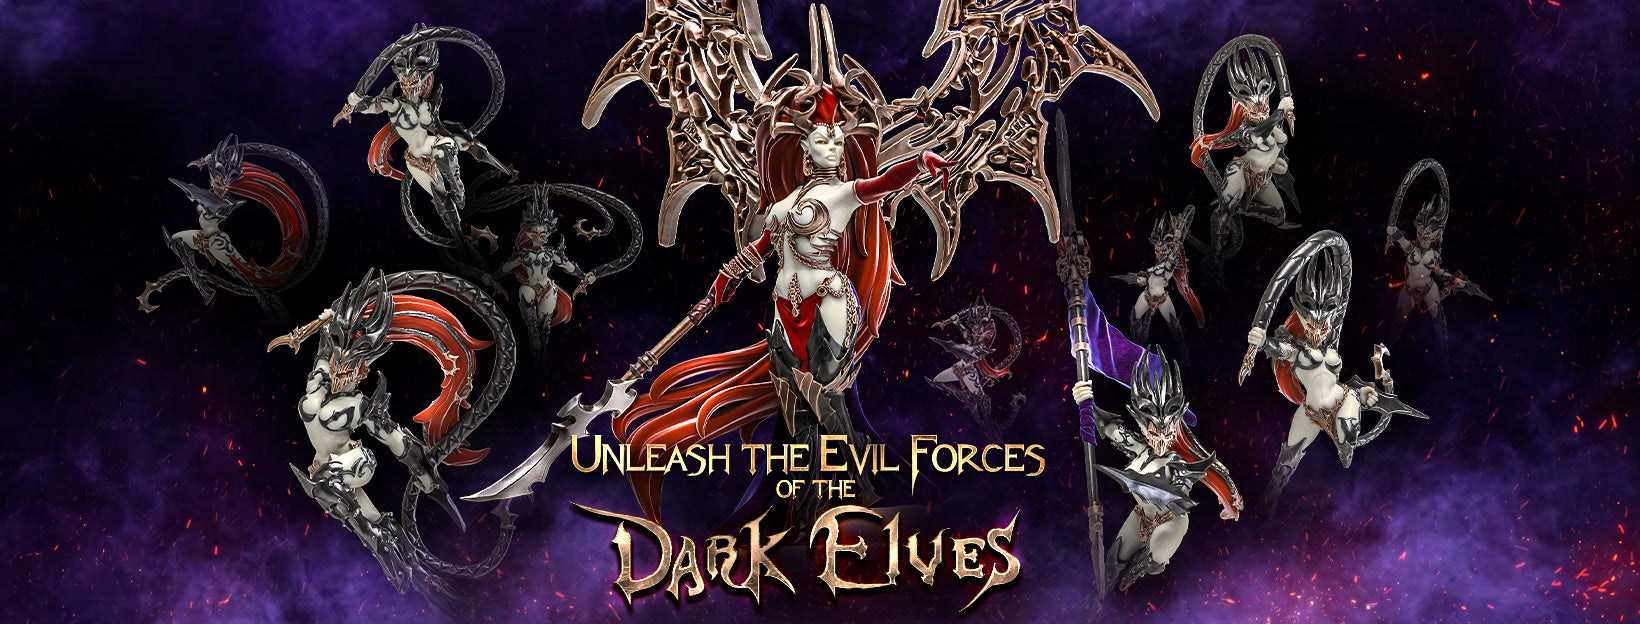 Unleash the Evil Forces of the Dark Elves